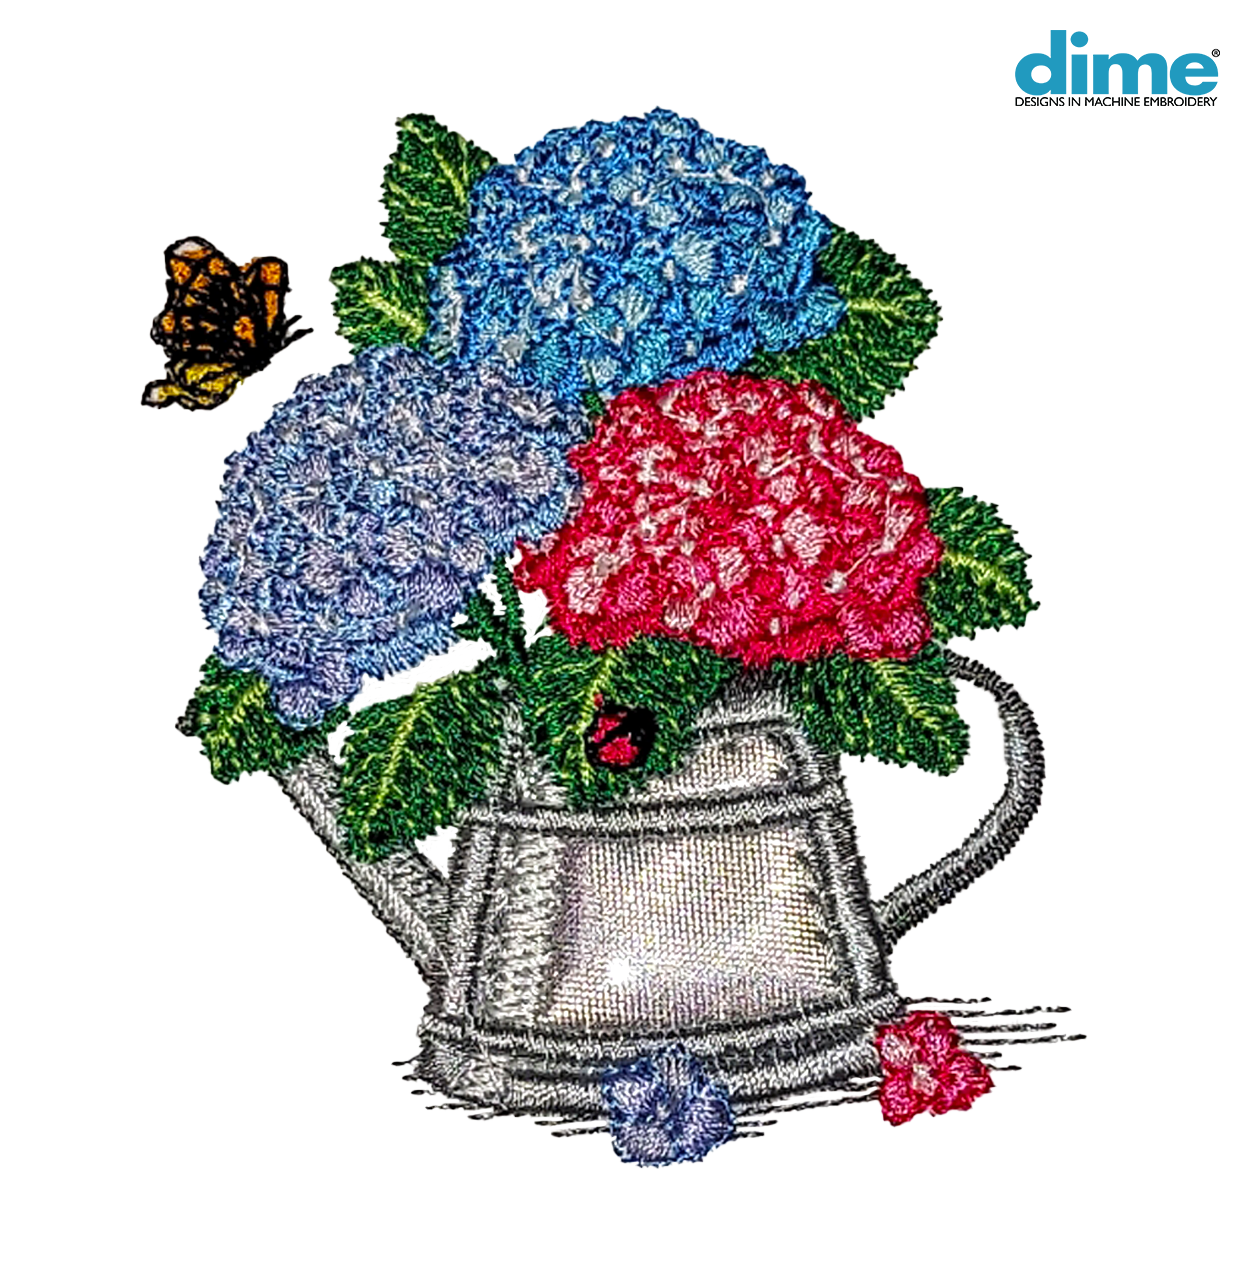 Colorful Hydrangea Bouquet in silver watering can